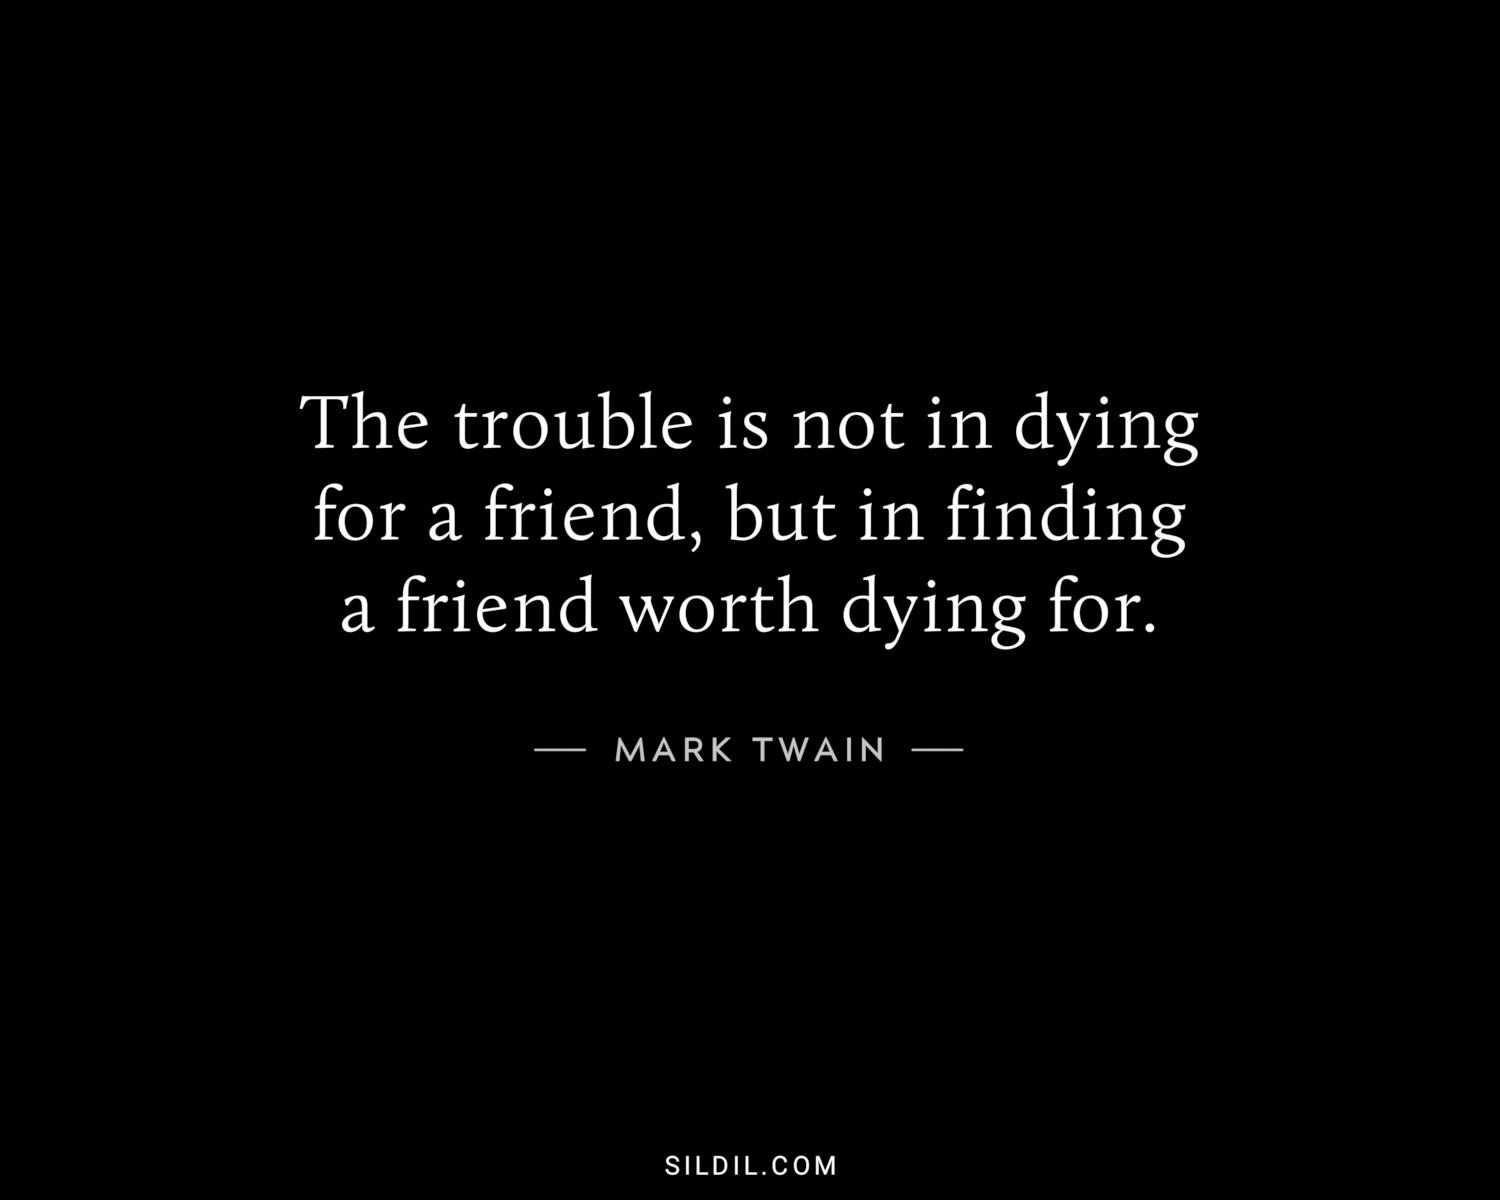 The trouble is not in dying for a friend, but in finding a friend worth dying for.